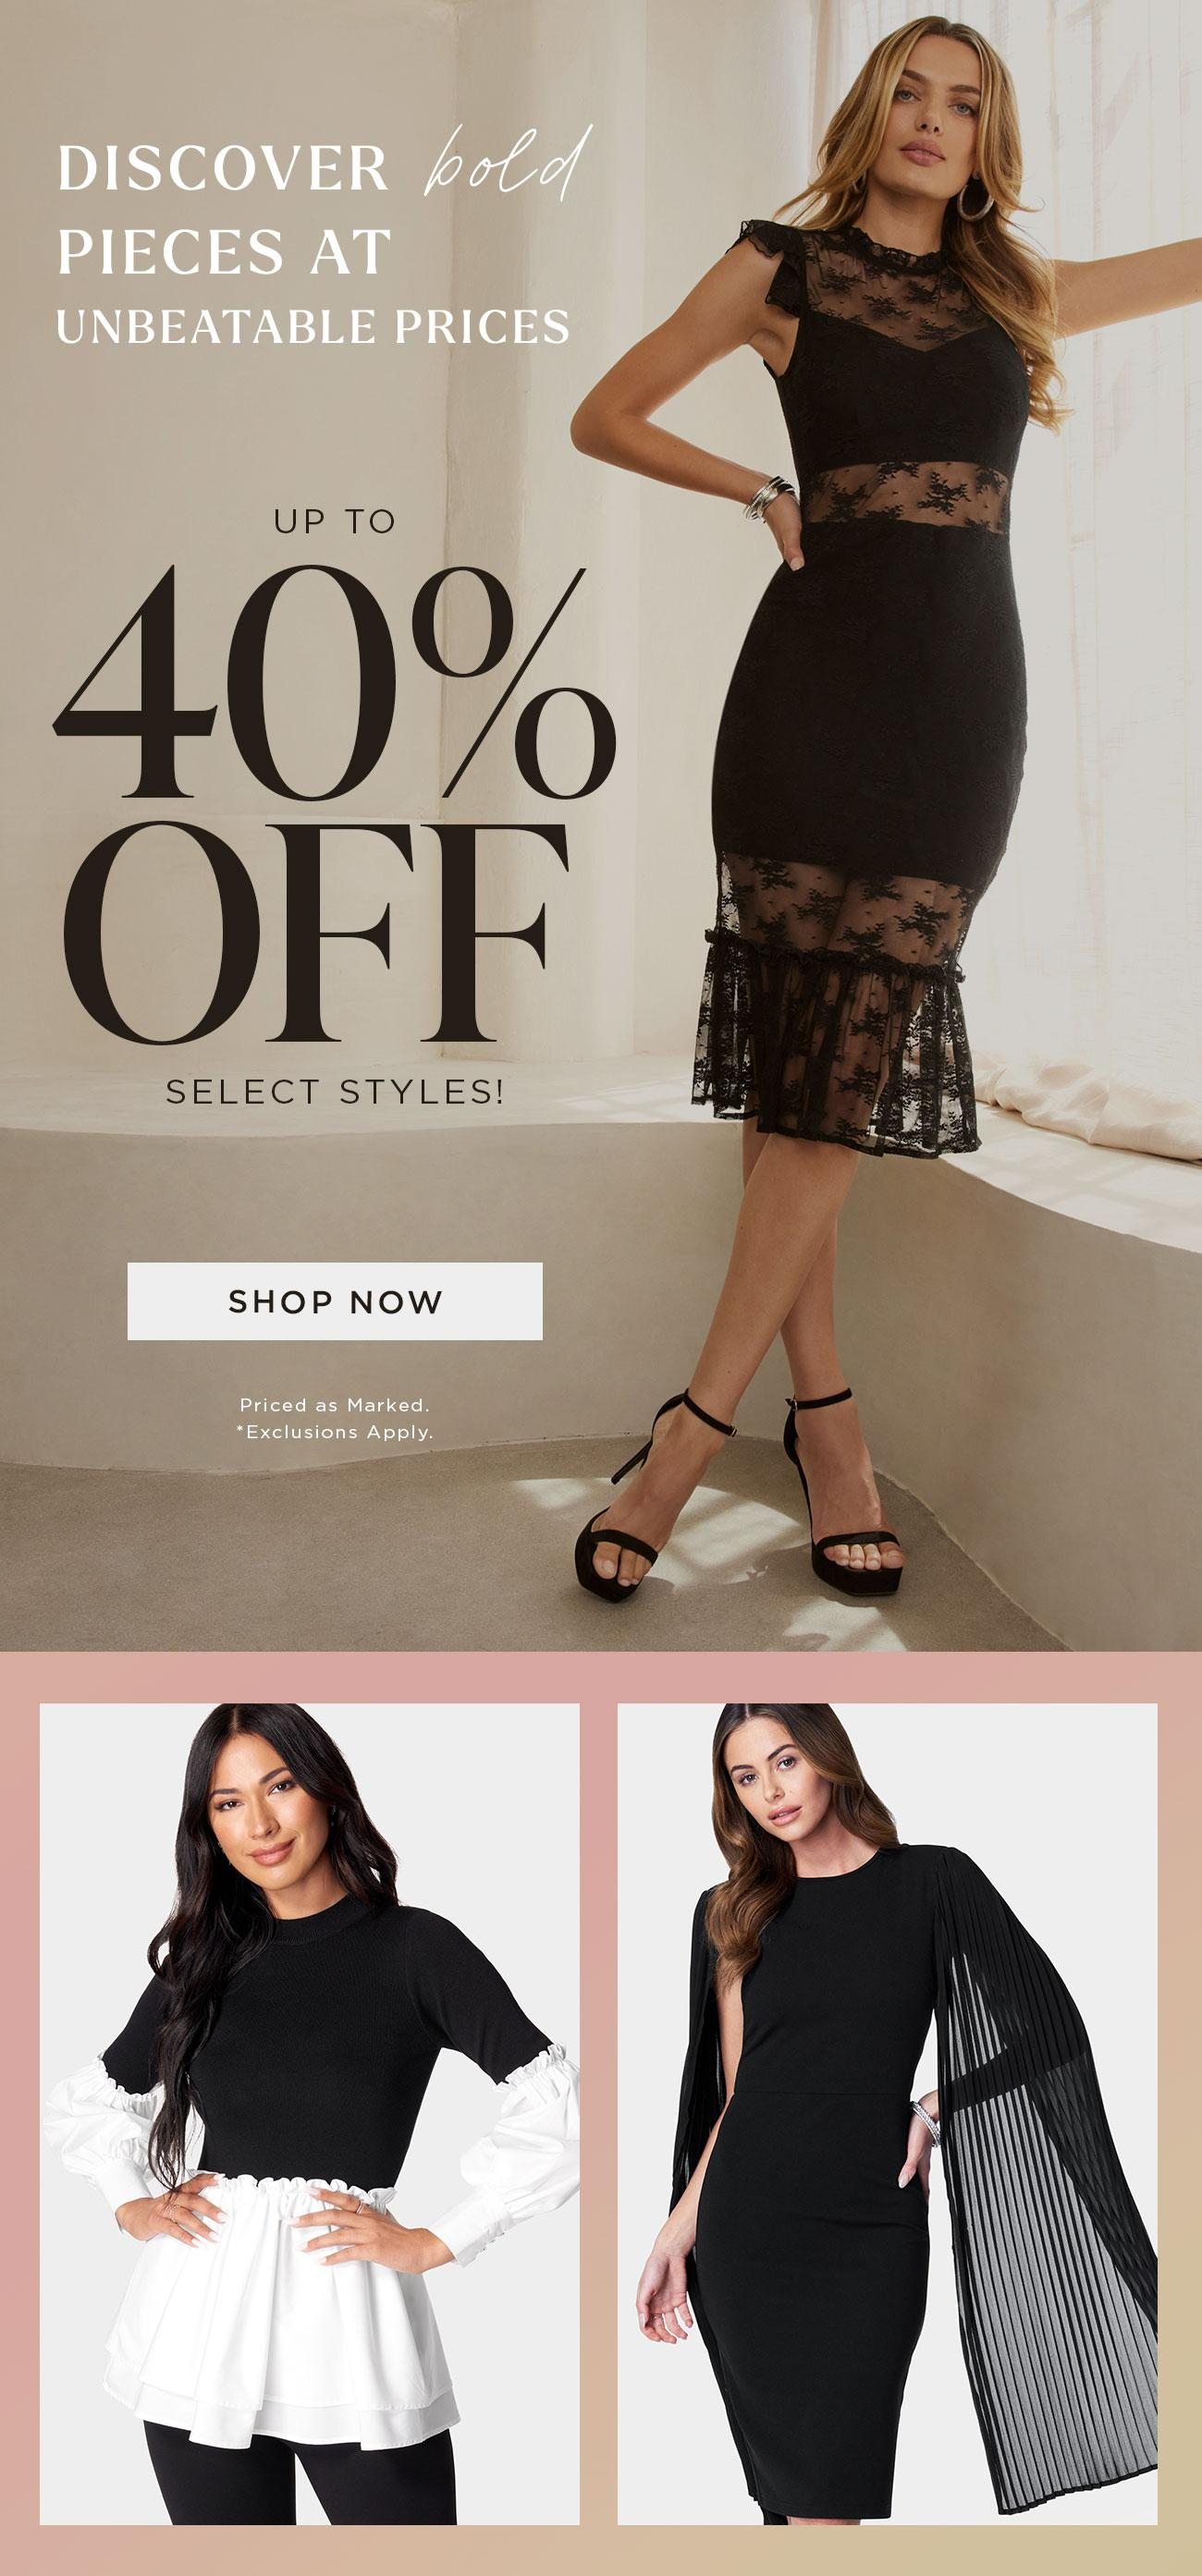 Up To 40% Off Select Styles! | Shop Now